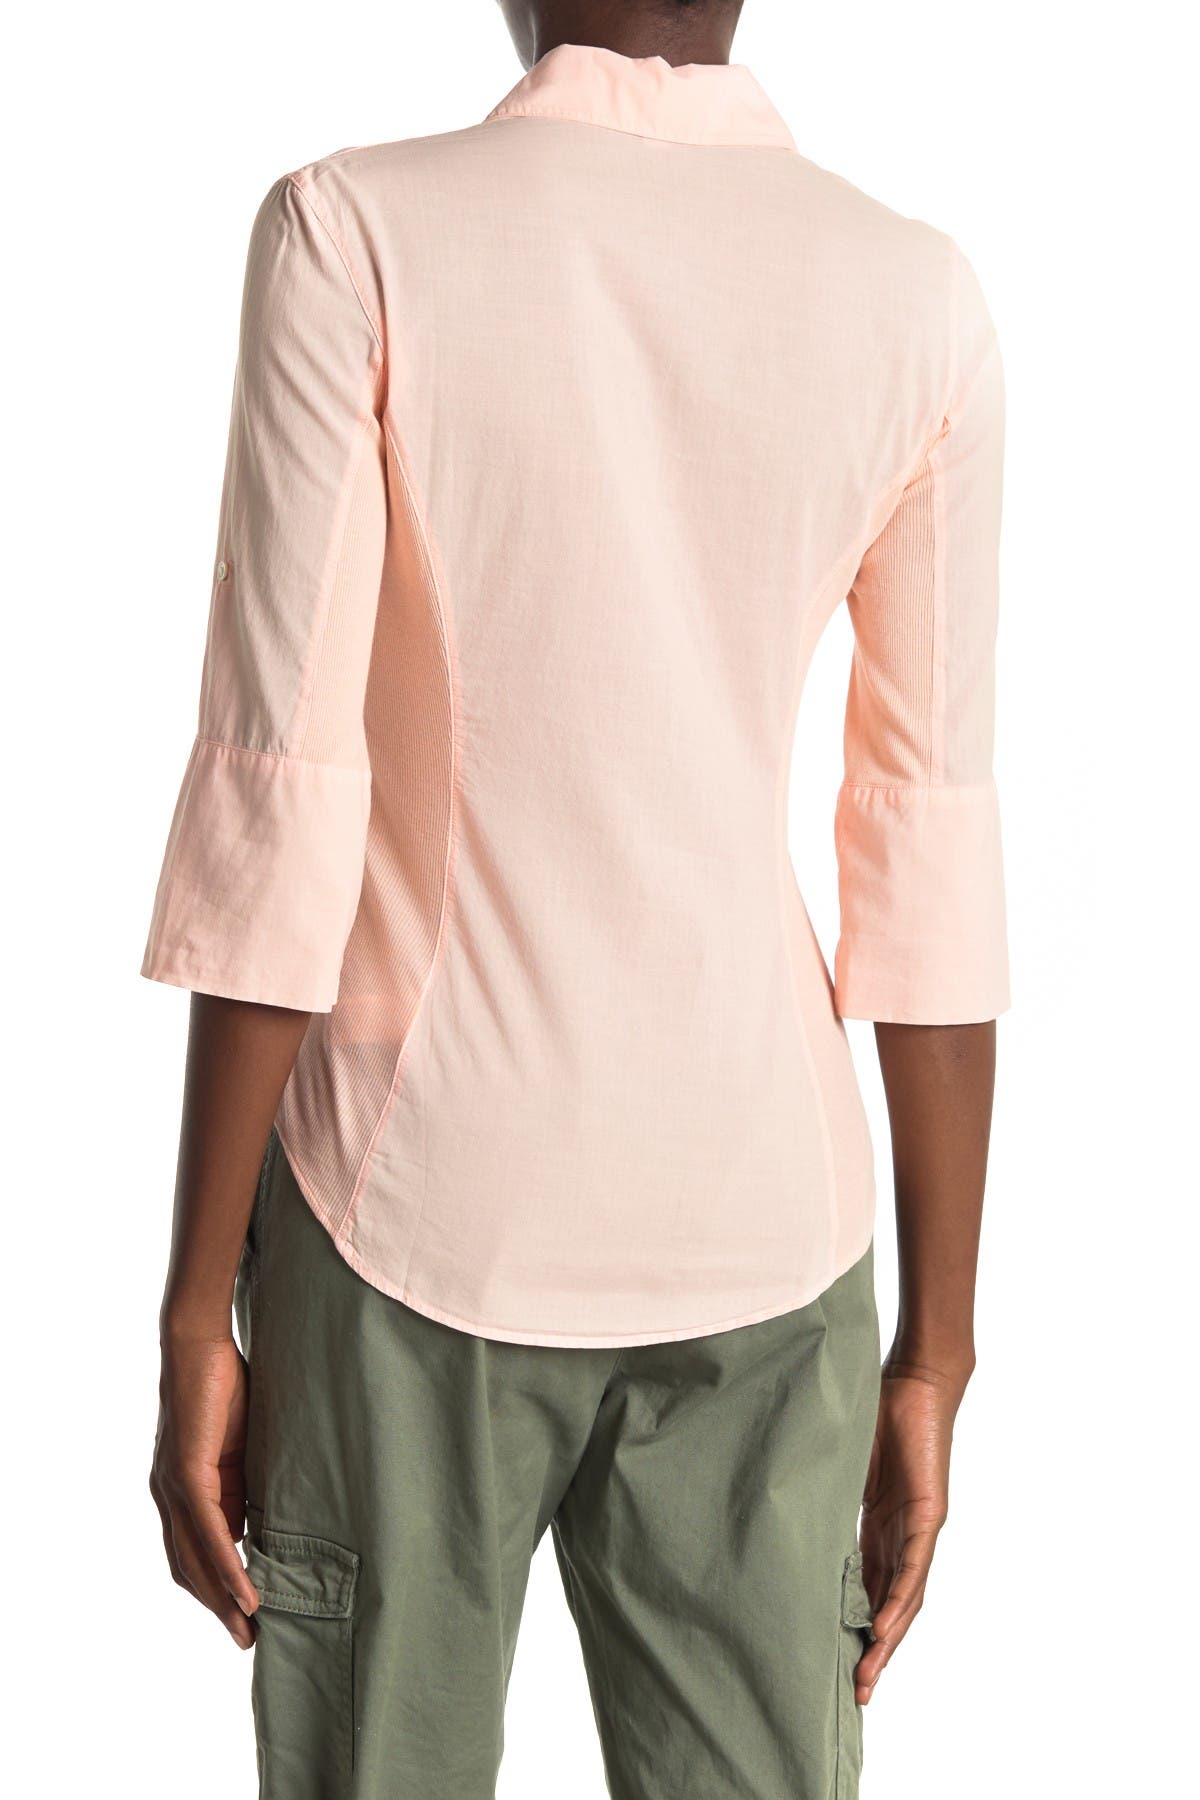 James Perse Contrast Ribbed Surplus Shirt In Open Pink